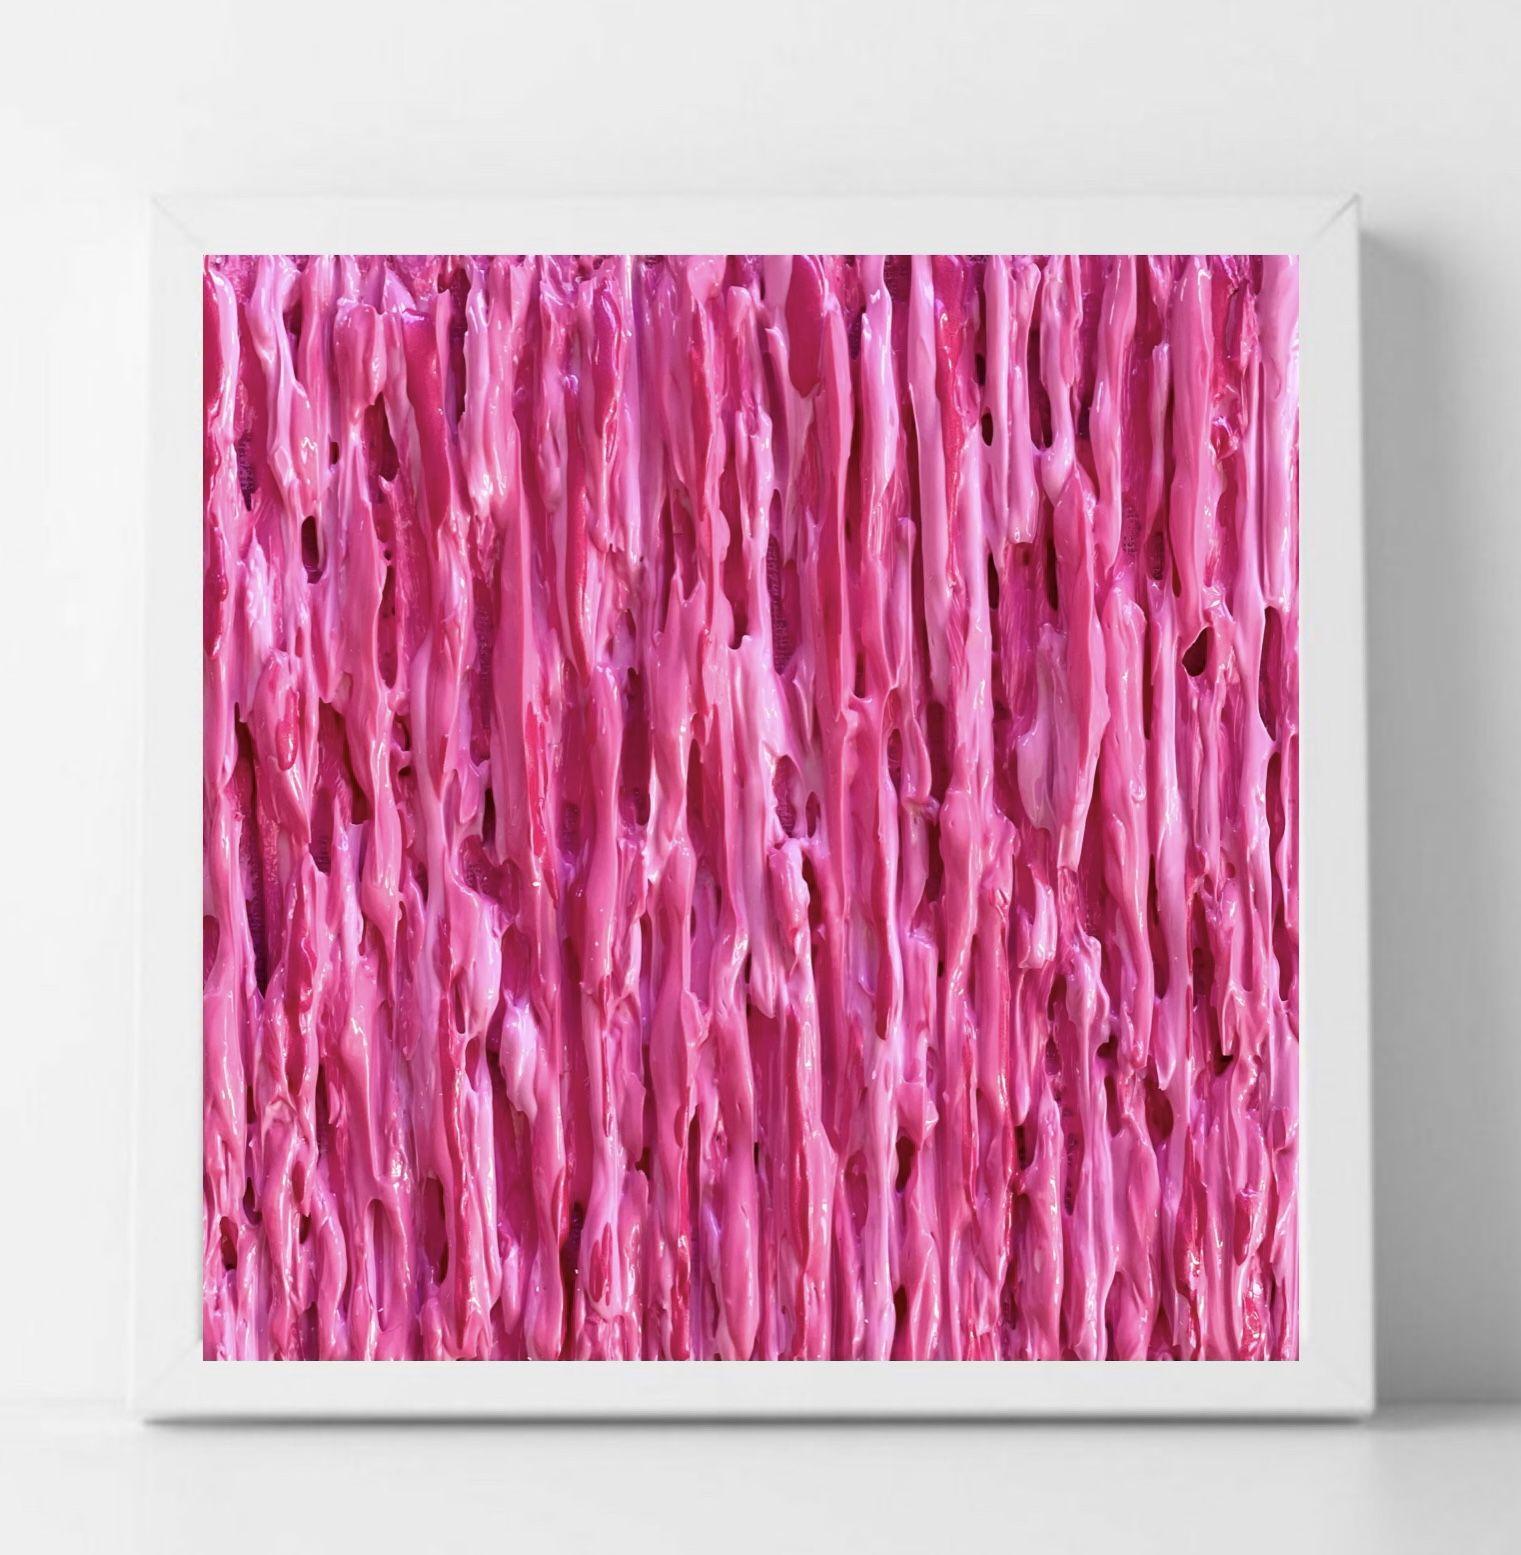 MELODIE MONOCROMATICHE - VIVA MAGENTA!, Mixed Media on Canvas - Abstract Mixed Media Art by Daniela Pasqualini